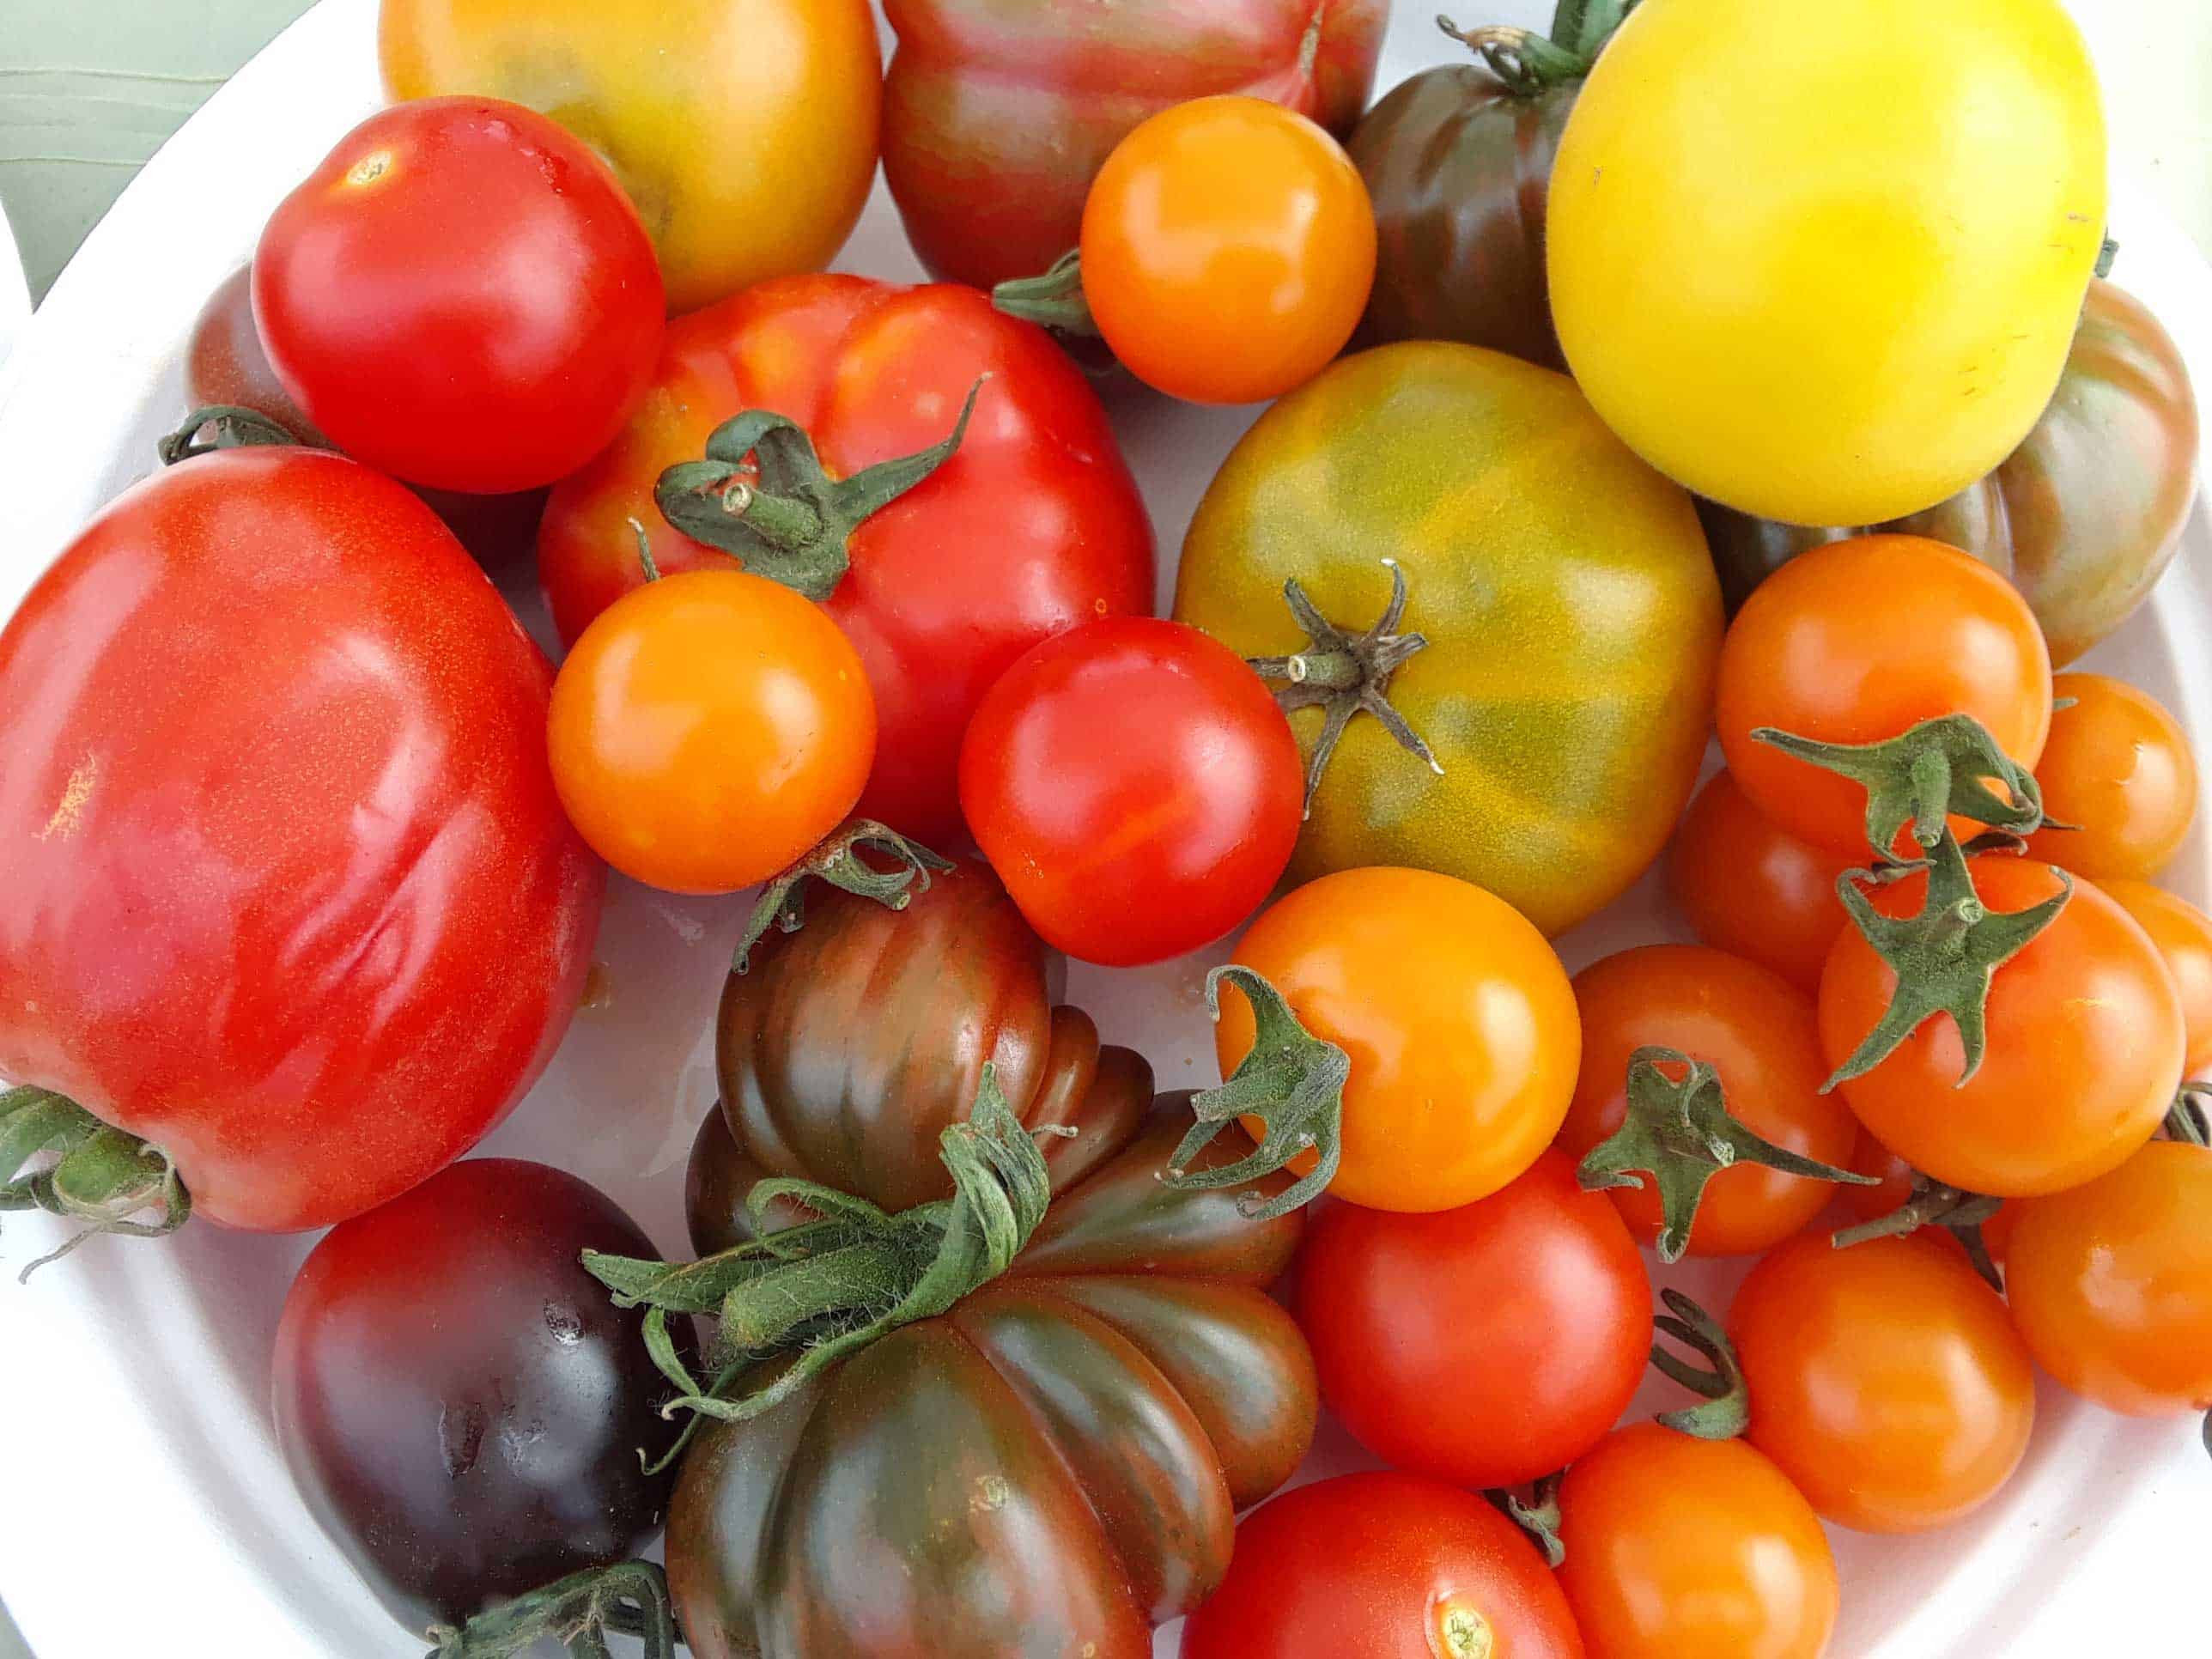 Selecting the Best Tomato Varieties for Growing in the Pacific Northwest - Advice for Gary's List of 2023